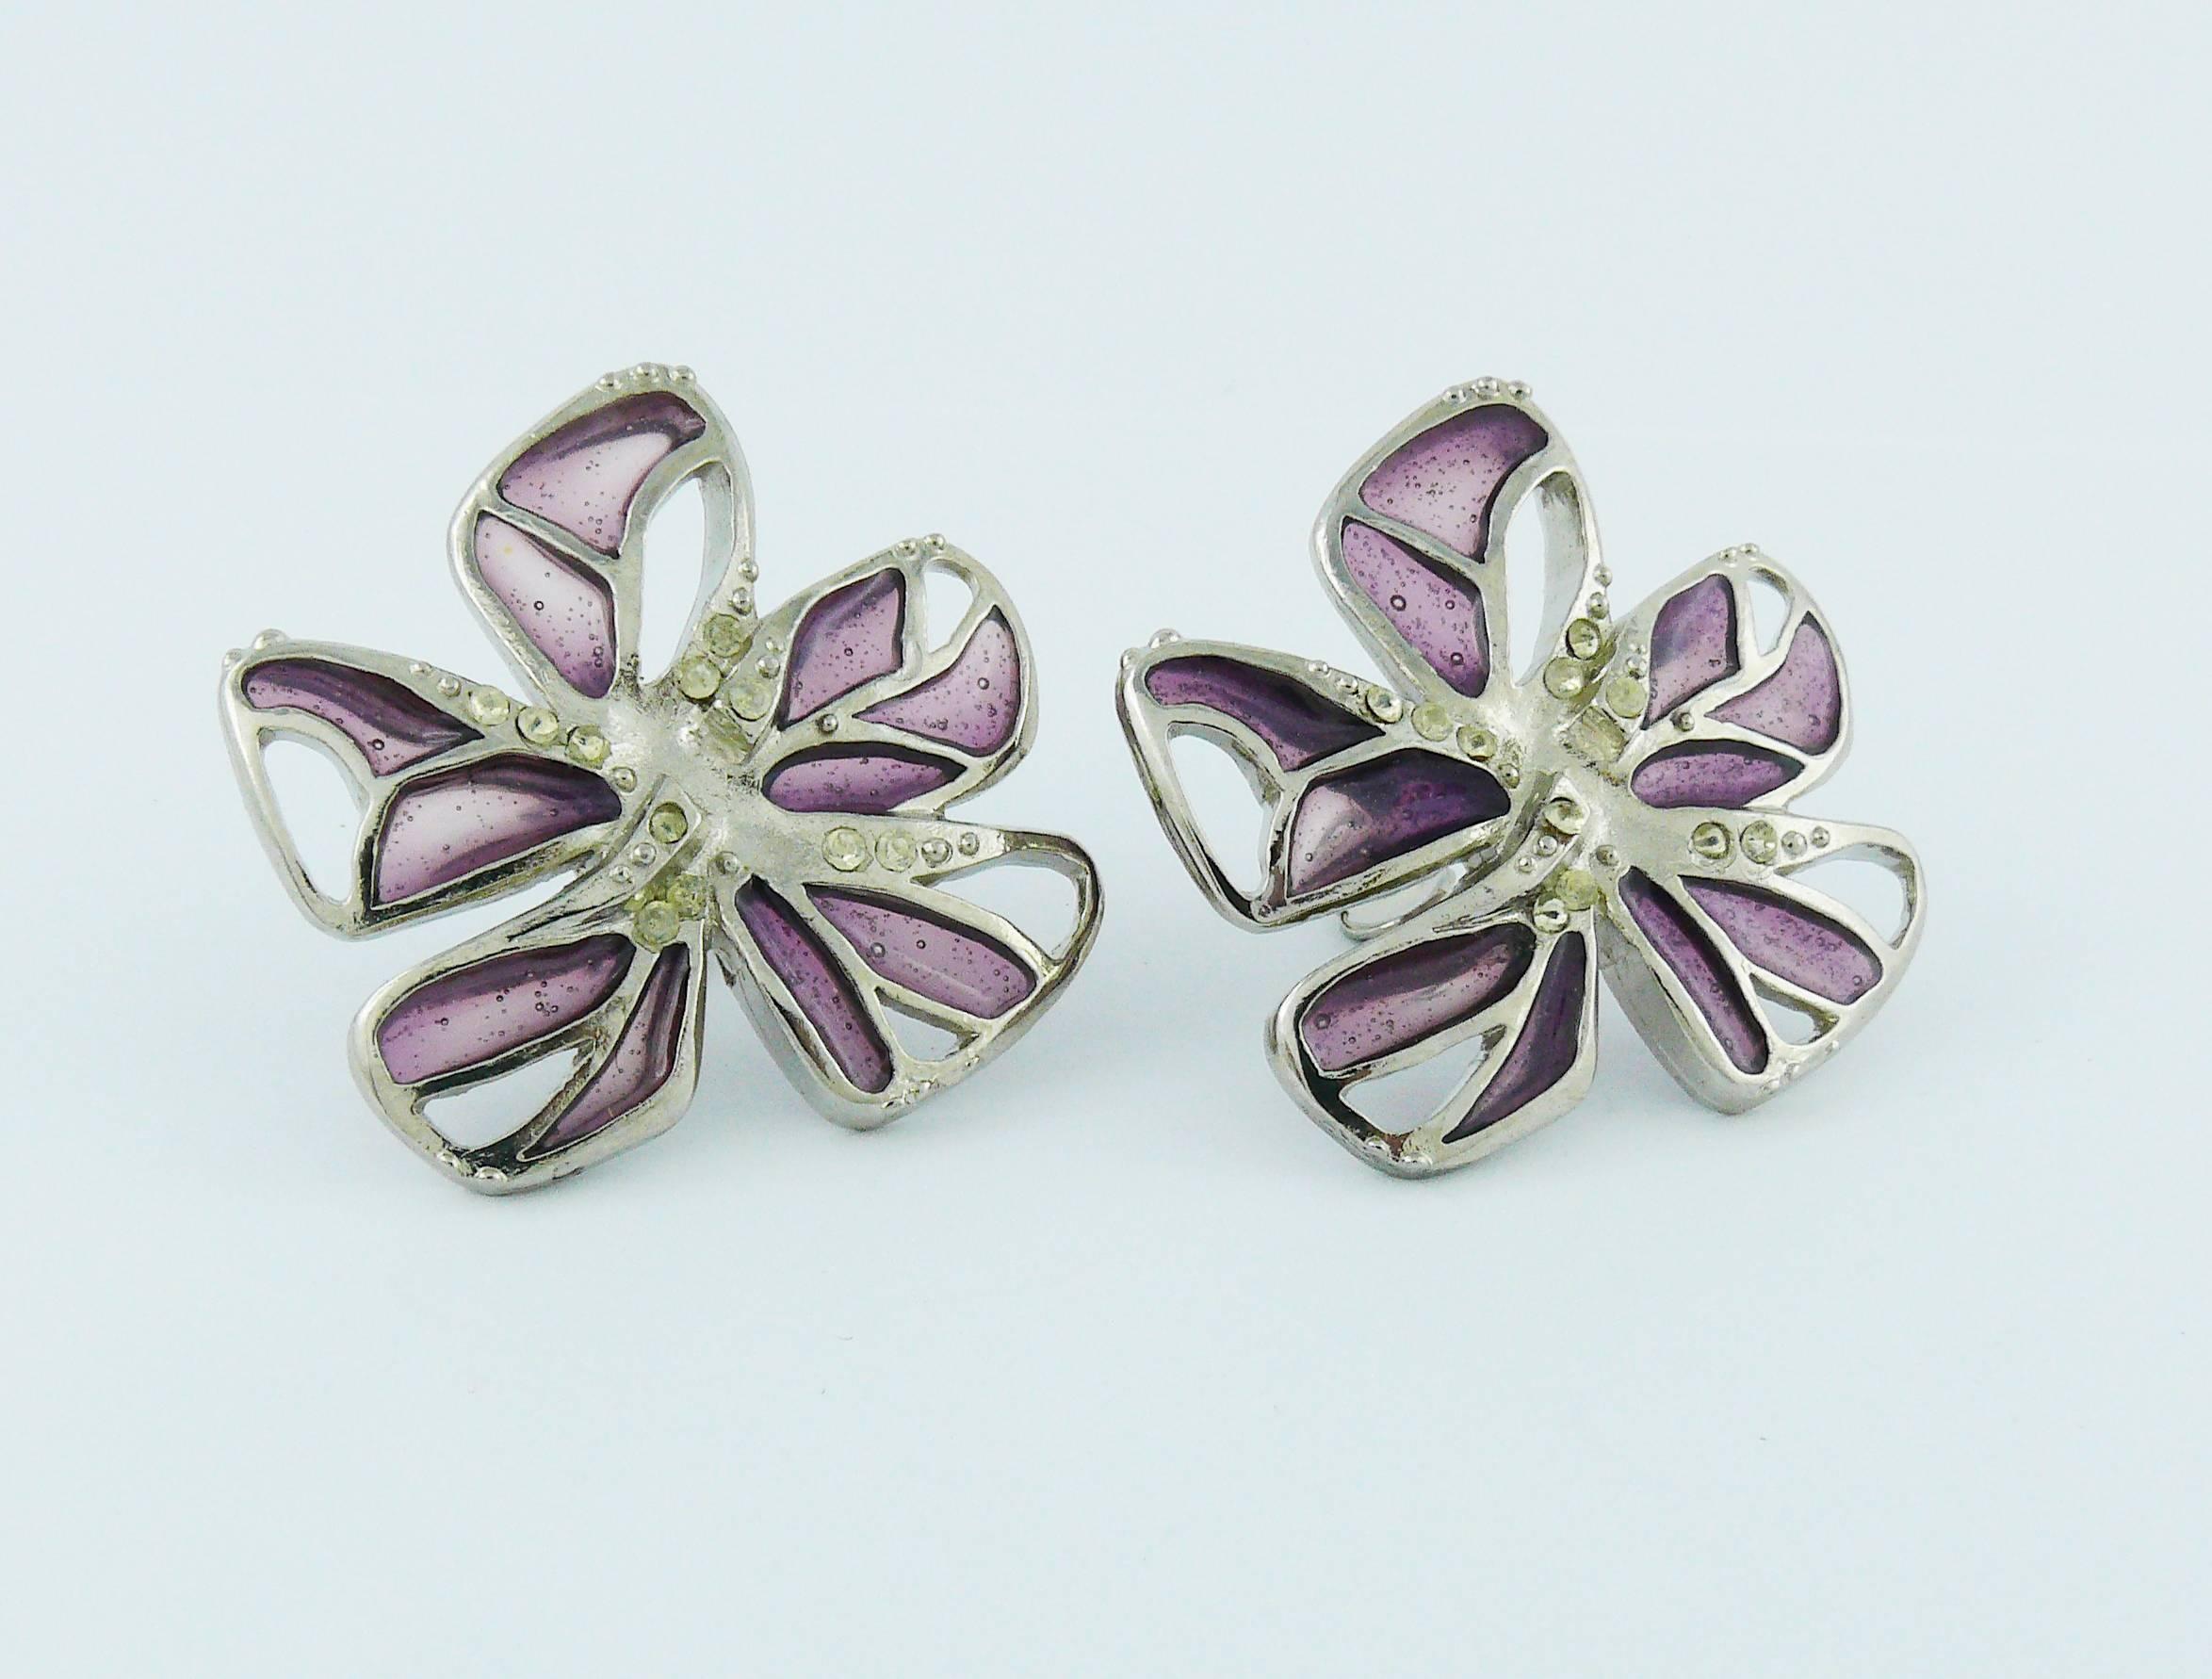 CHRISTIAN LACROIX silver toned clip-on earrings embellished with purple resin "stained glass" like.

Embossed CL France.

Indicative measurements : height approx. 3.3 cm (1.30 inches) / max. width approx. 3.6 cm (1.42 inches).

JEWELRY